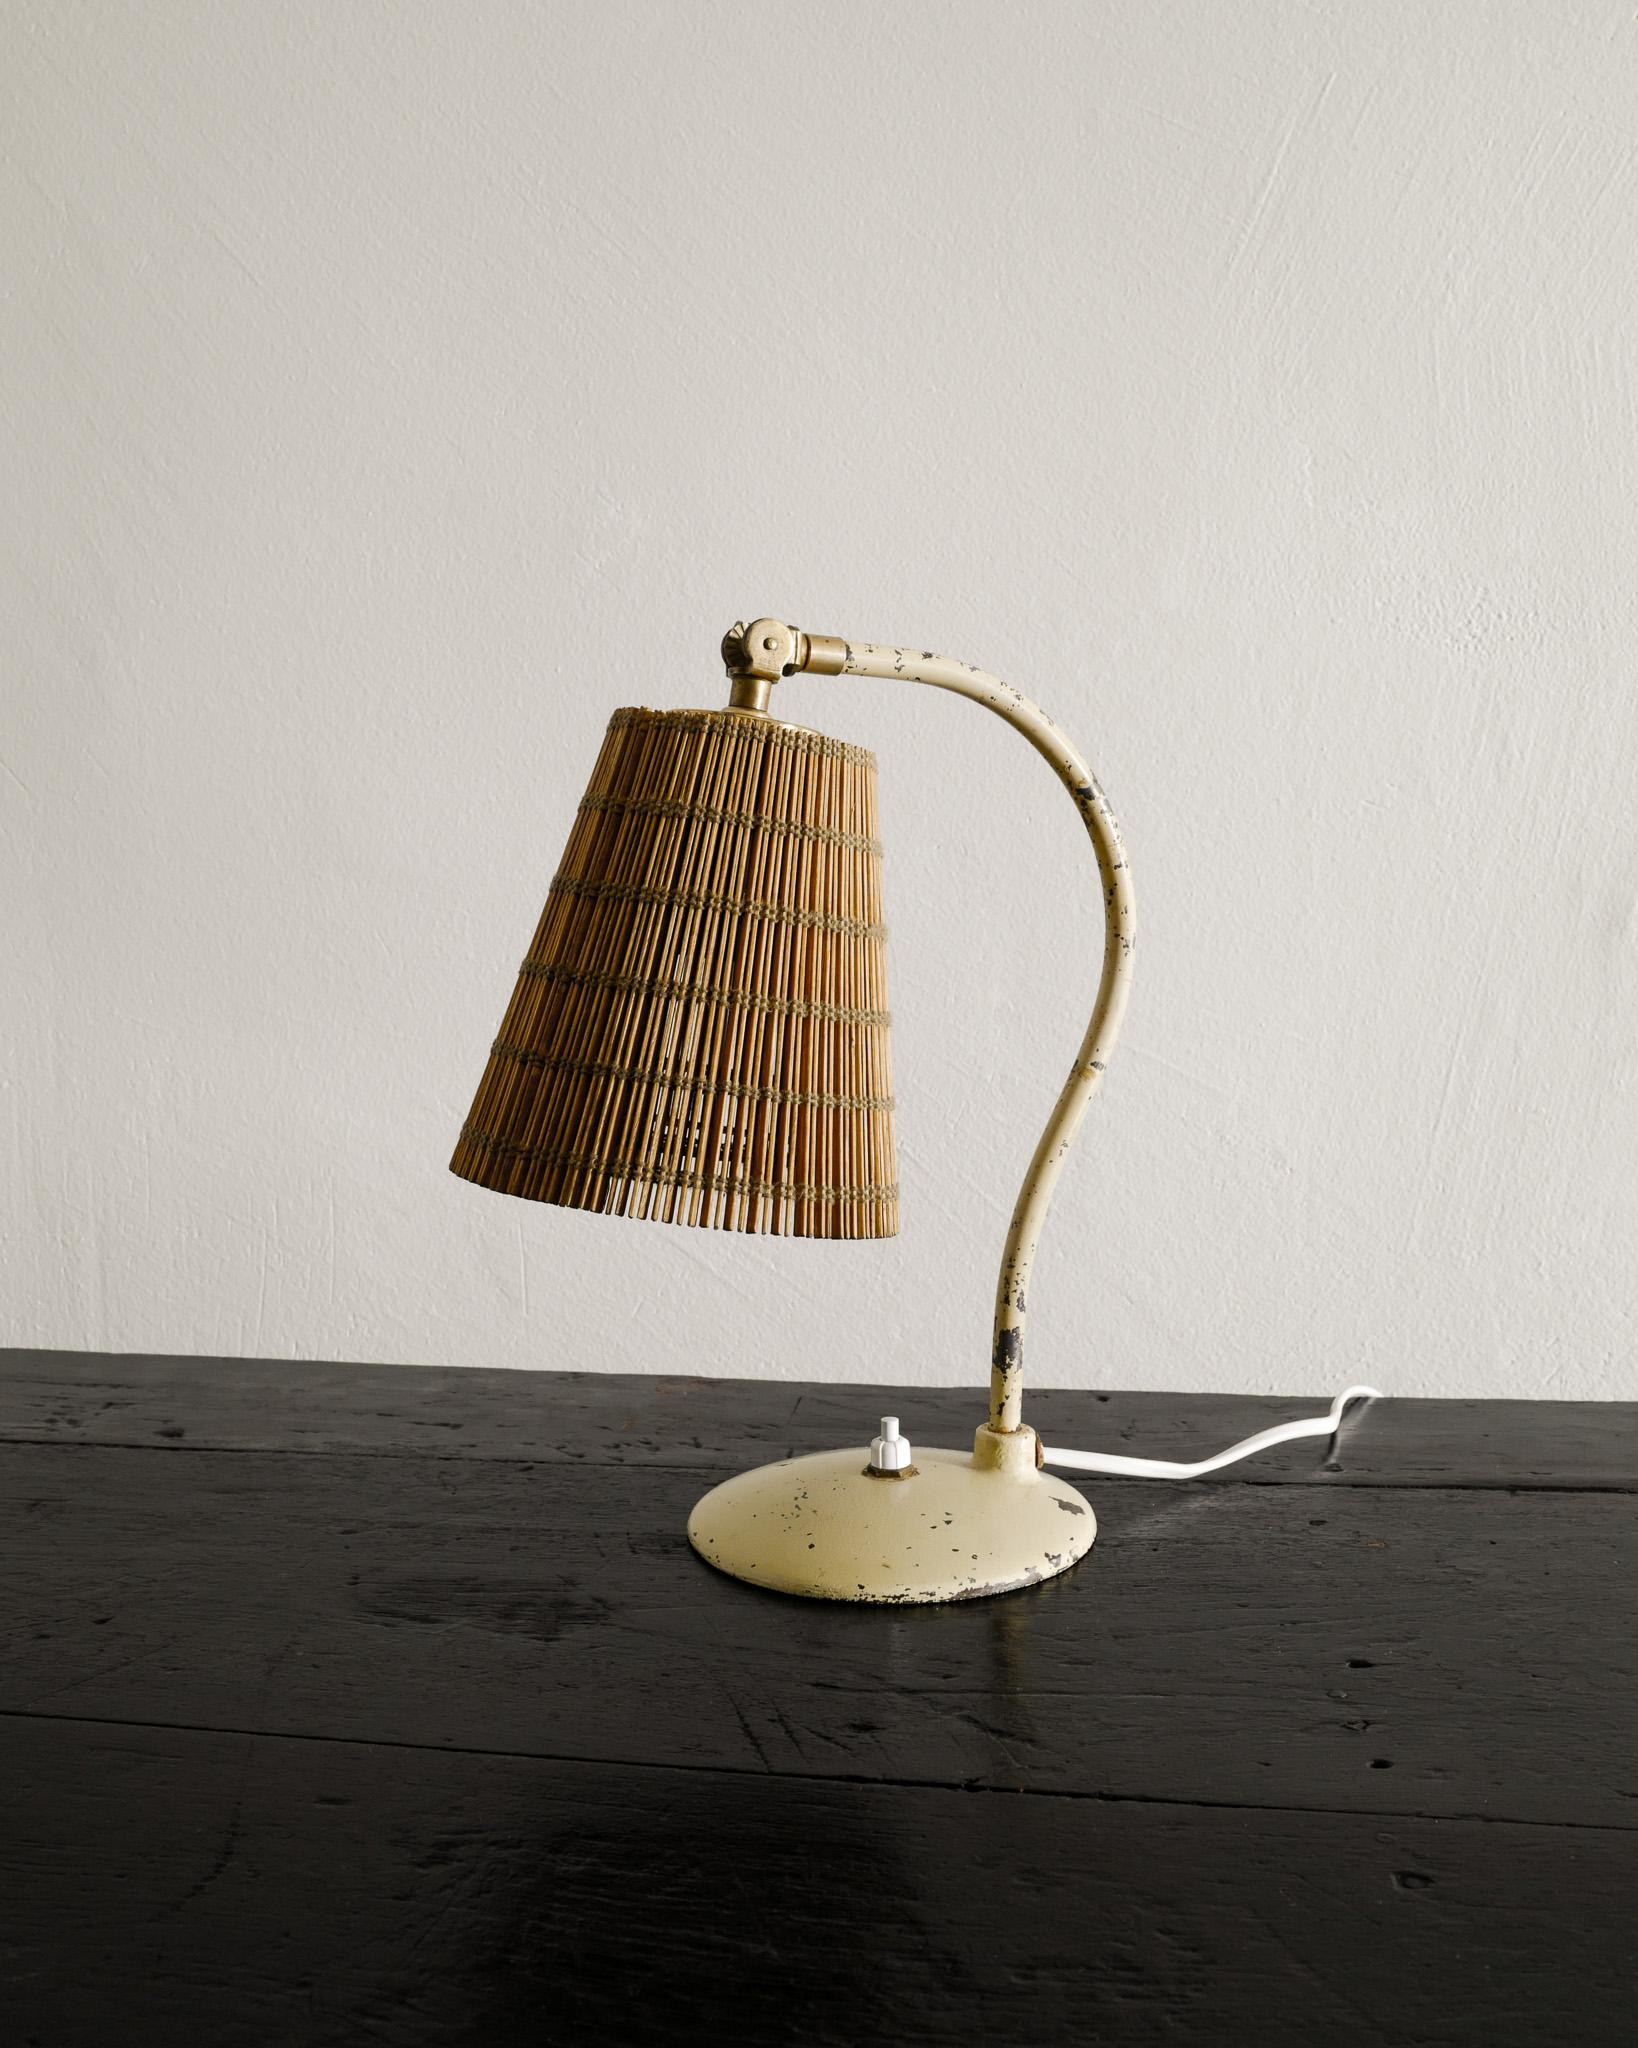 Very rare and early mid century desk / bed table lamp by Paavo Tynell in lacquered metal, brass and a pine straw shade. Produced by Taito Finland, 1930s. In good vintage condition and so is the shade. 

Dimensions: H: 29 cm / 11.40